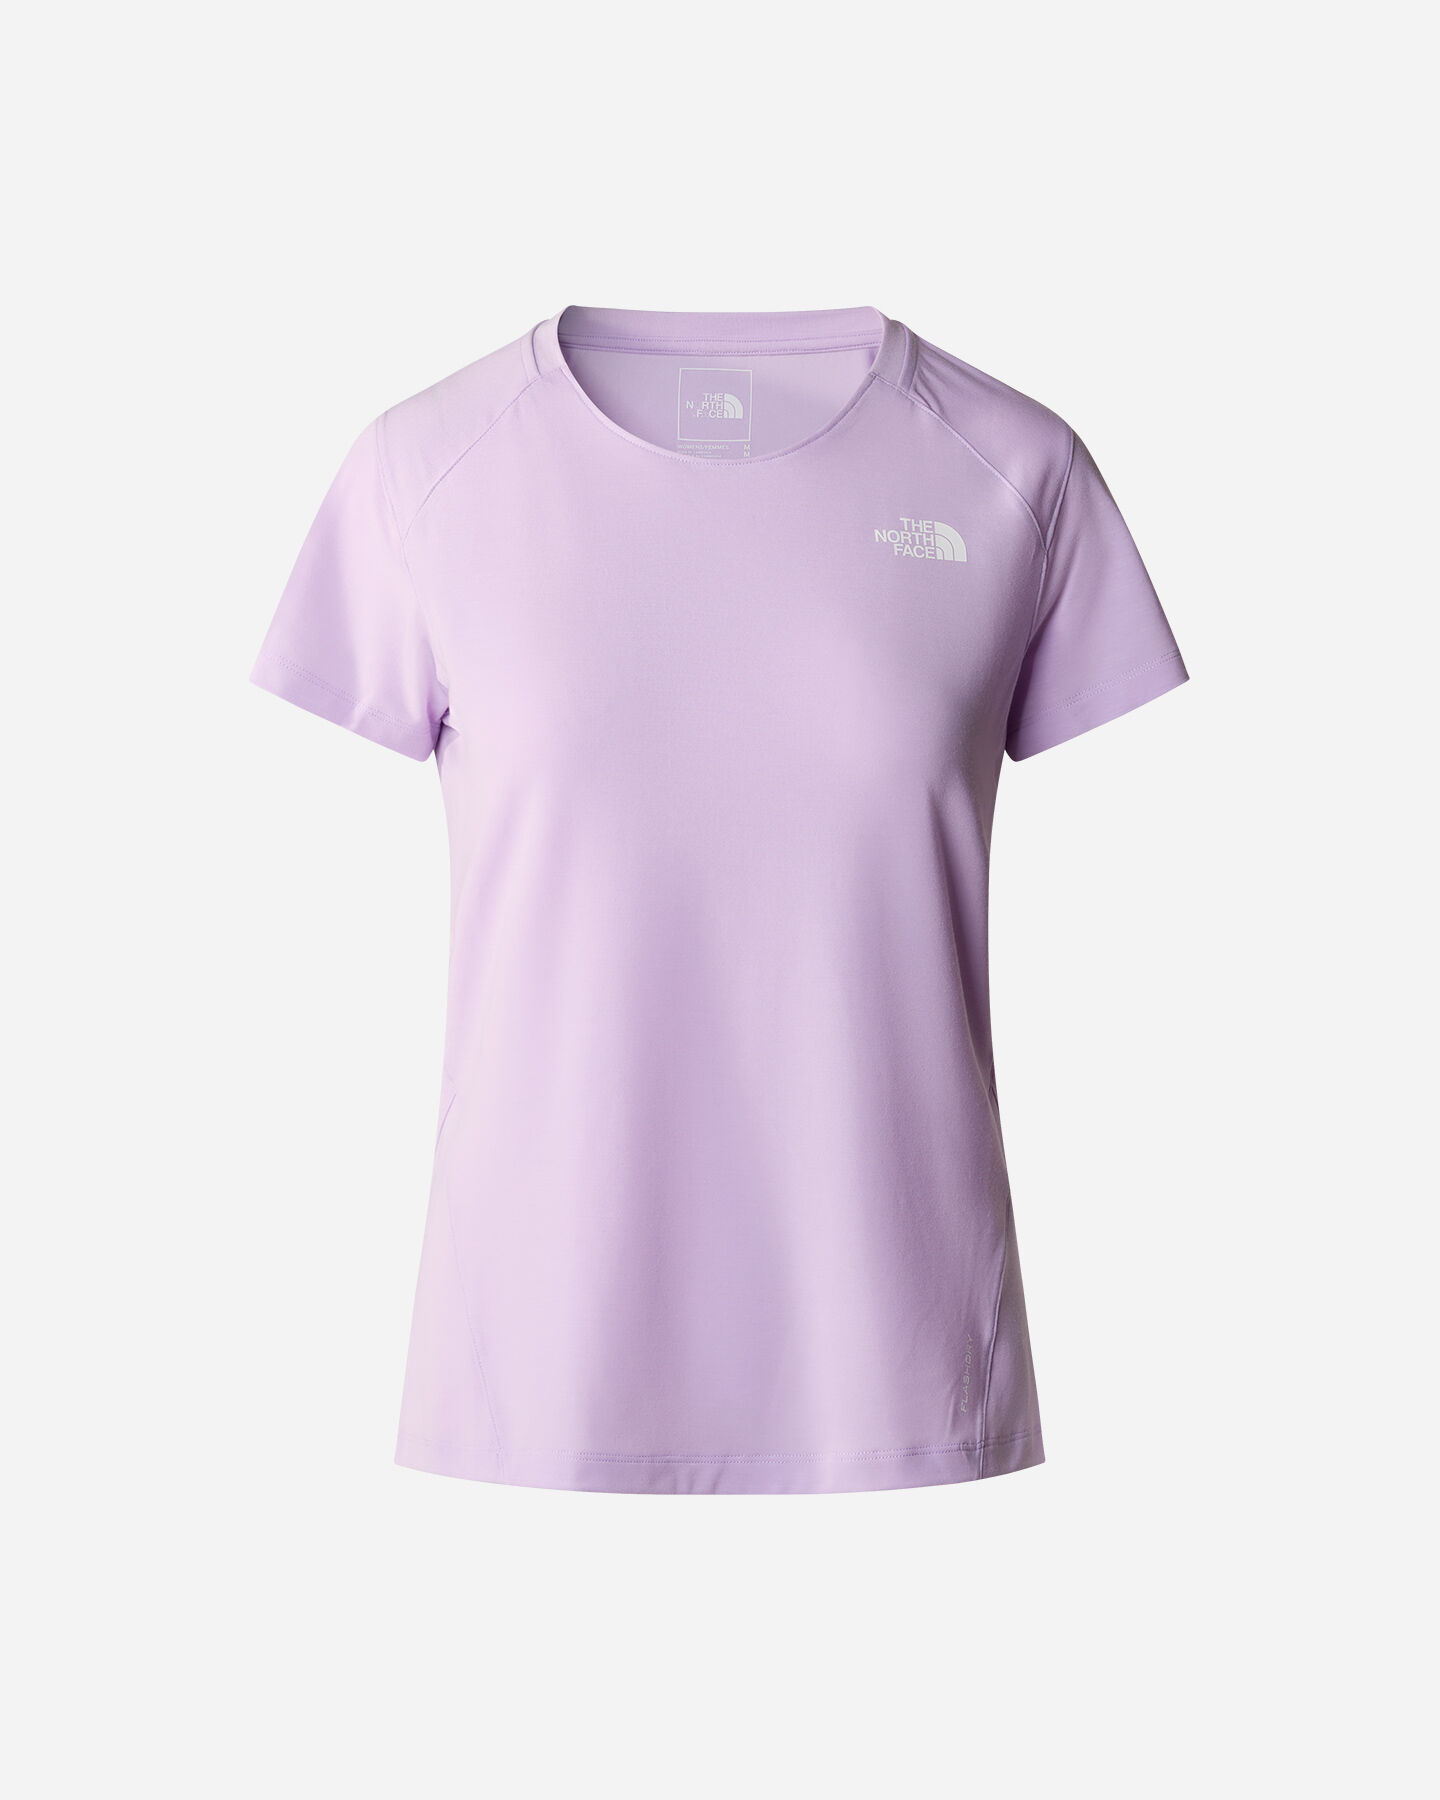  T-Shirt THE NORTH FACE LIGHTNING ALPINE W S5650899|QZI|S scatto 0